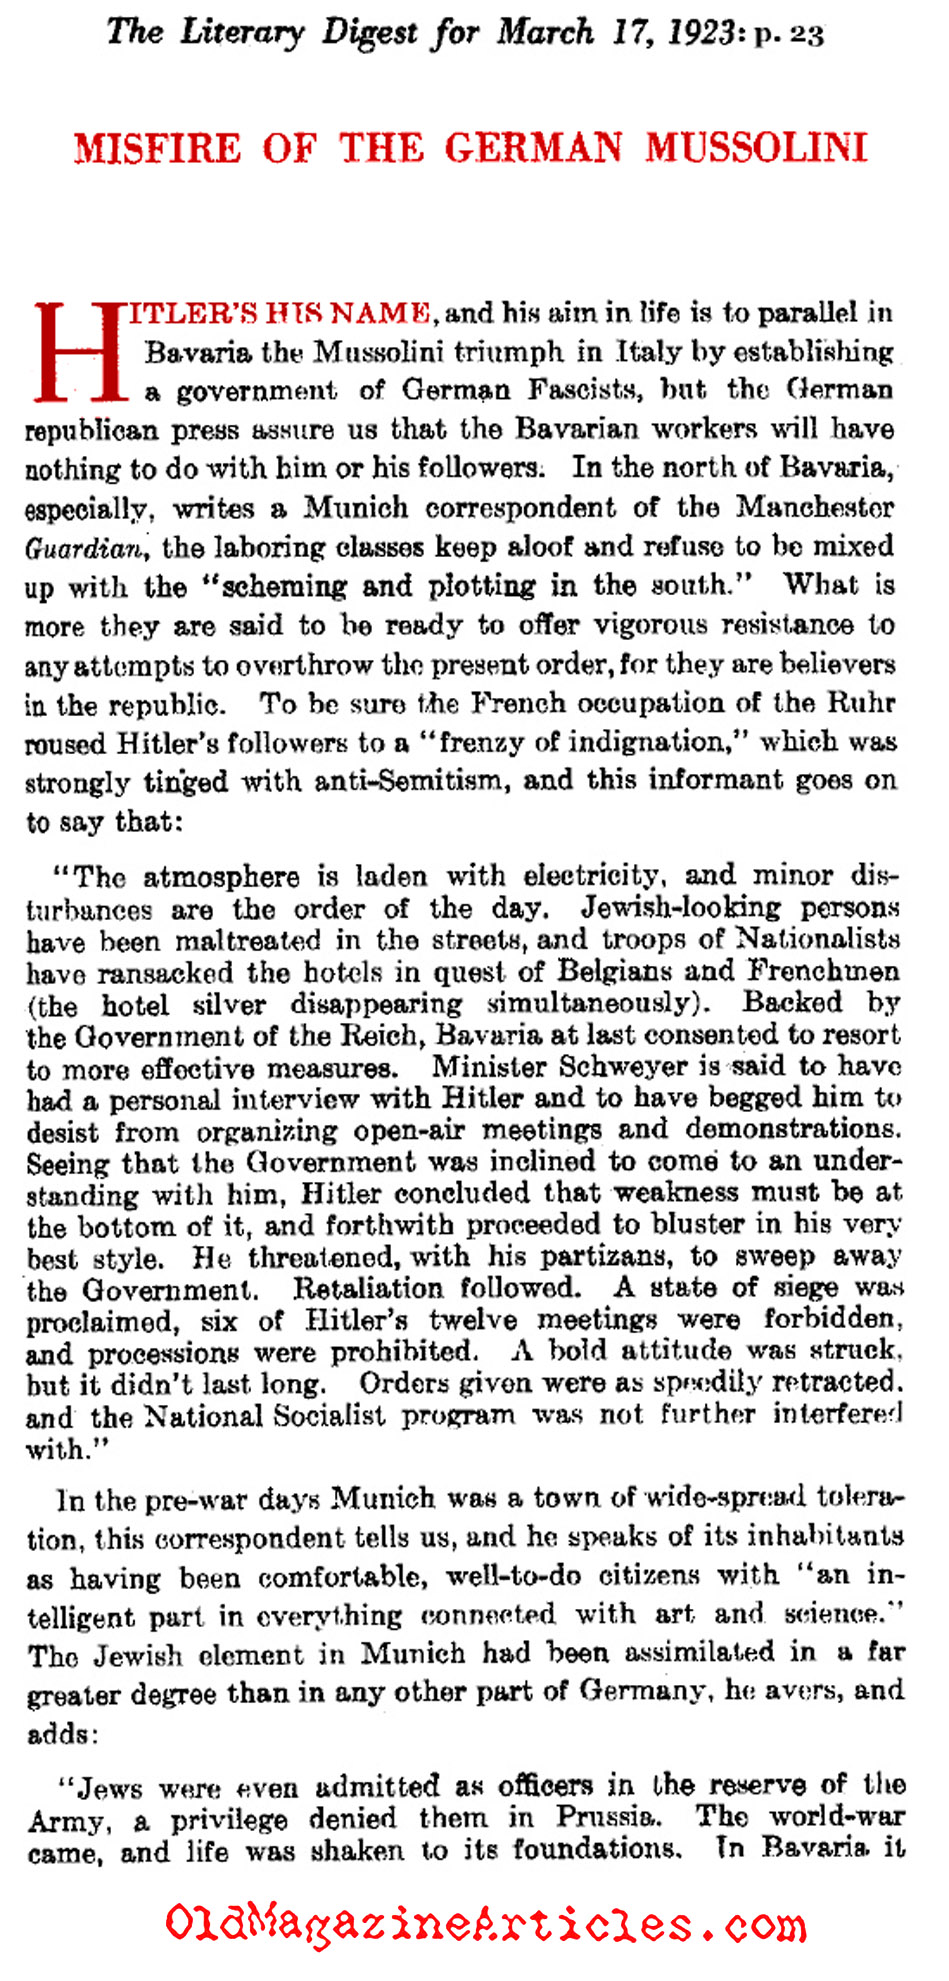 Hitler: Ten Years Before his Rise (Literary Digest, 1923)